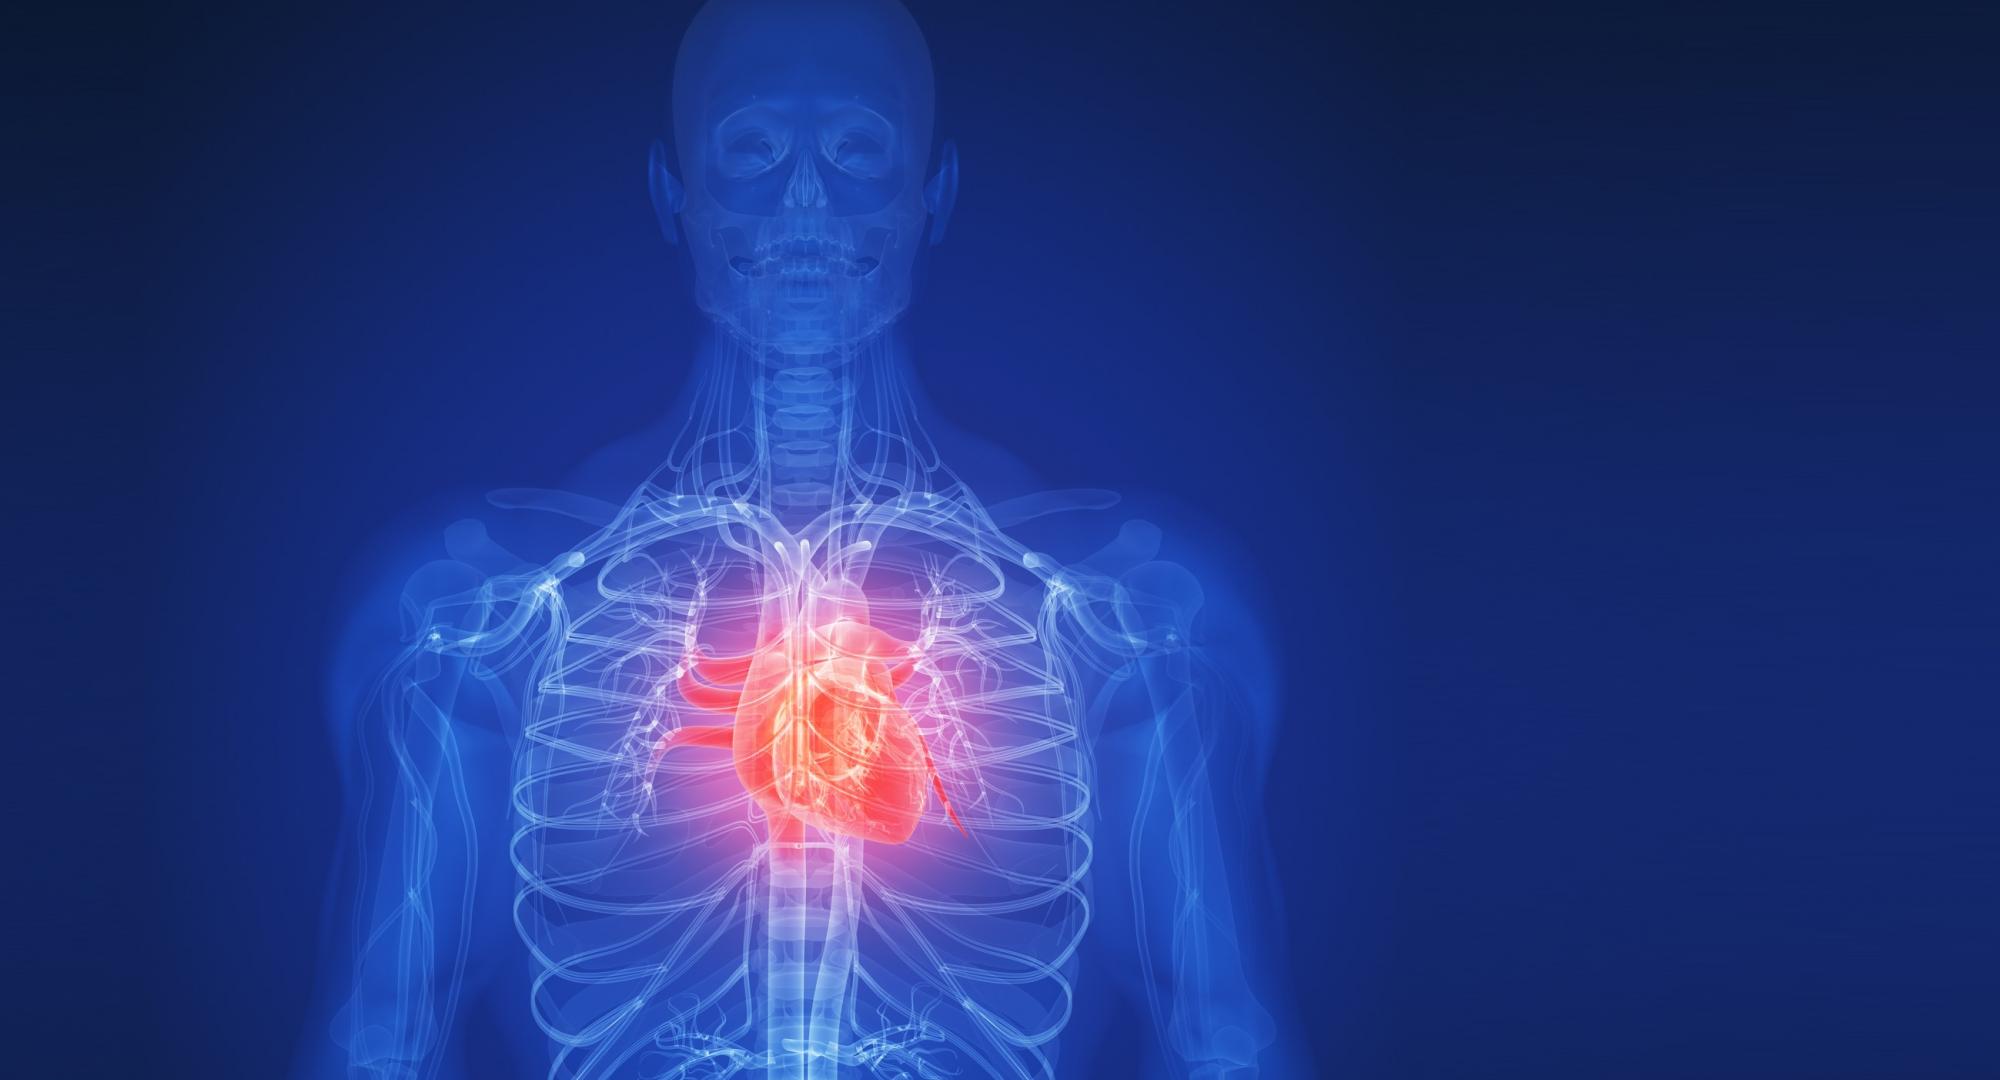 Wireframe illustration of the human body with the heart highlighted